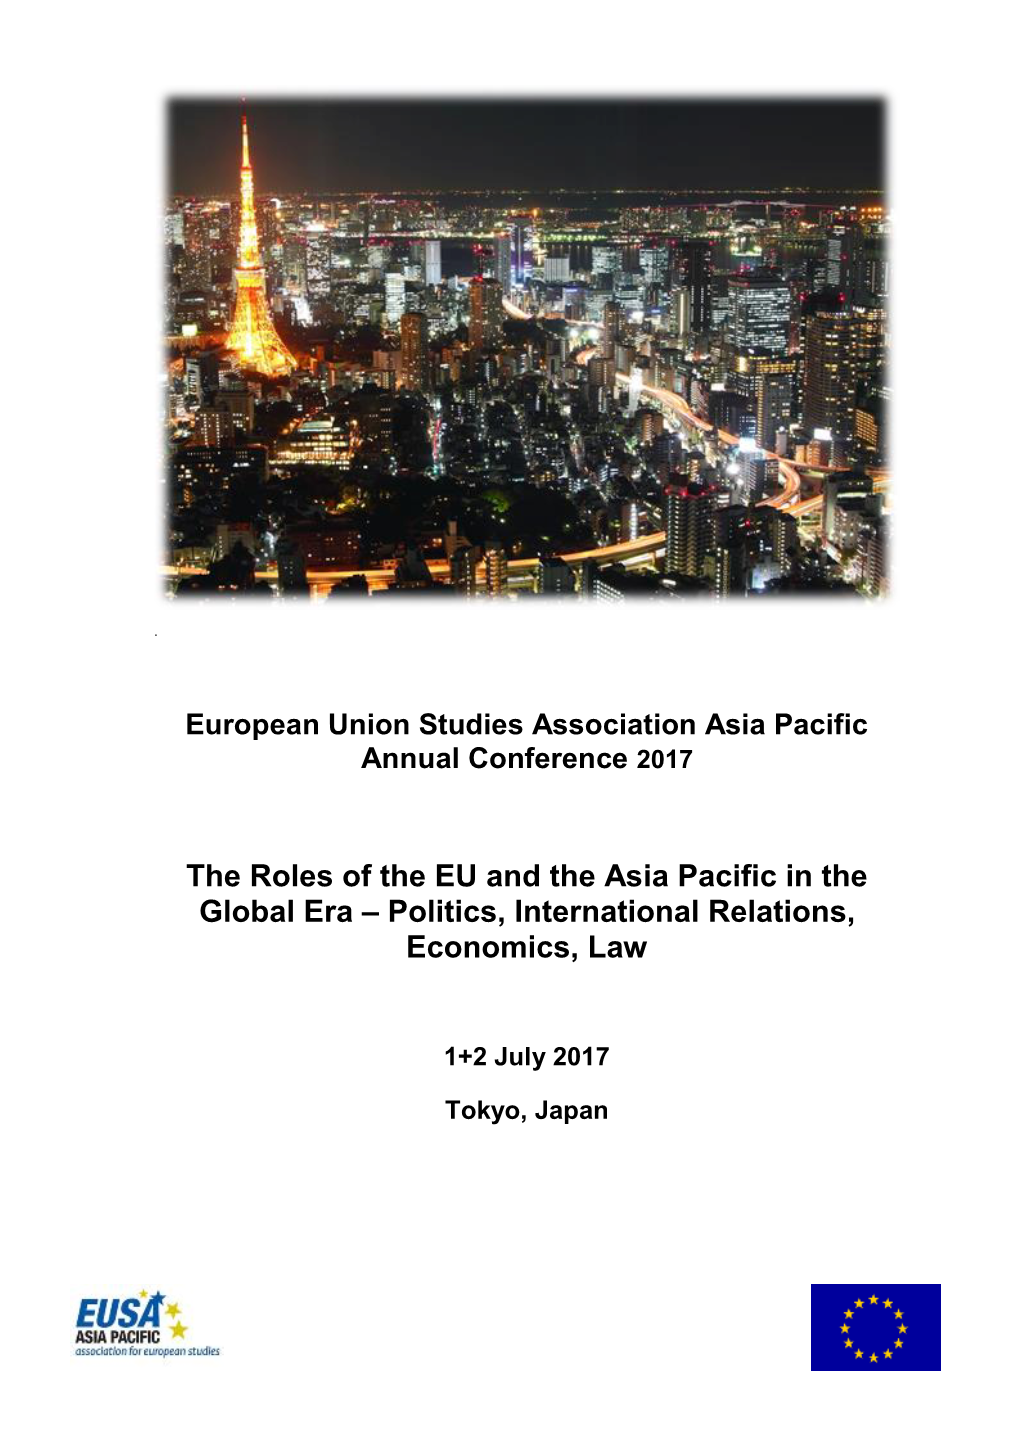 The Roles of the EU and the Asia Pacific in the Global Era – Politics, International Relations, Economics, Law